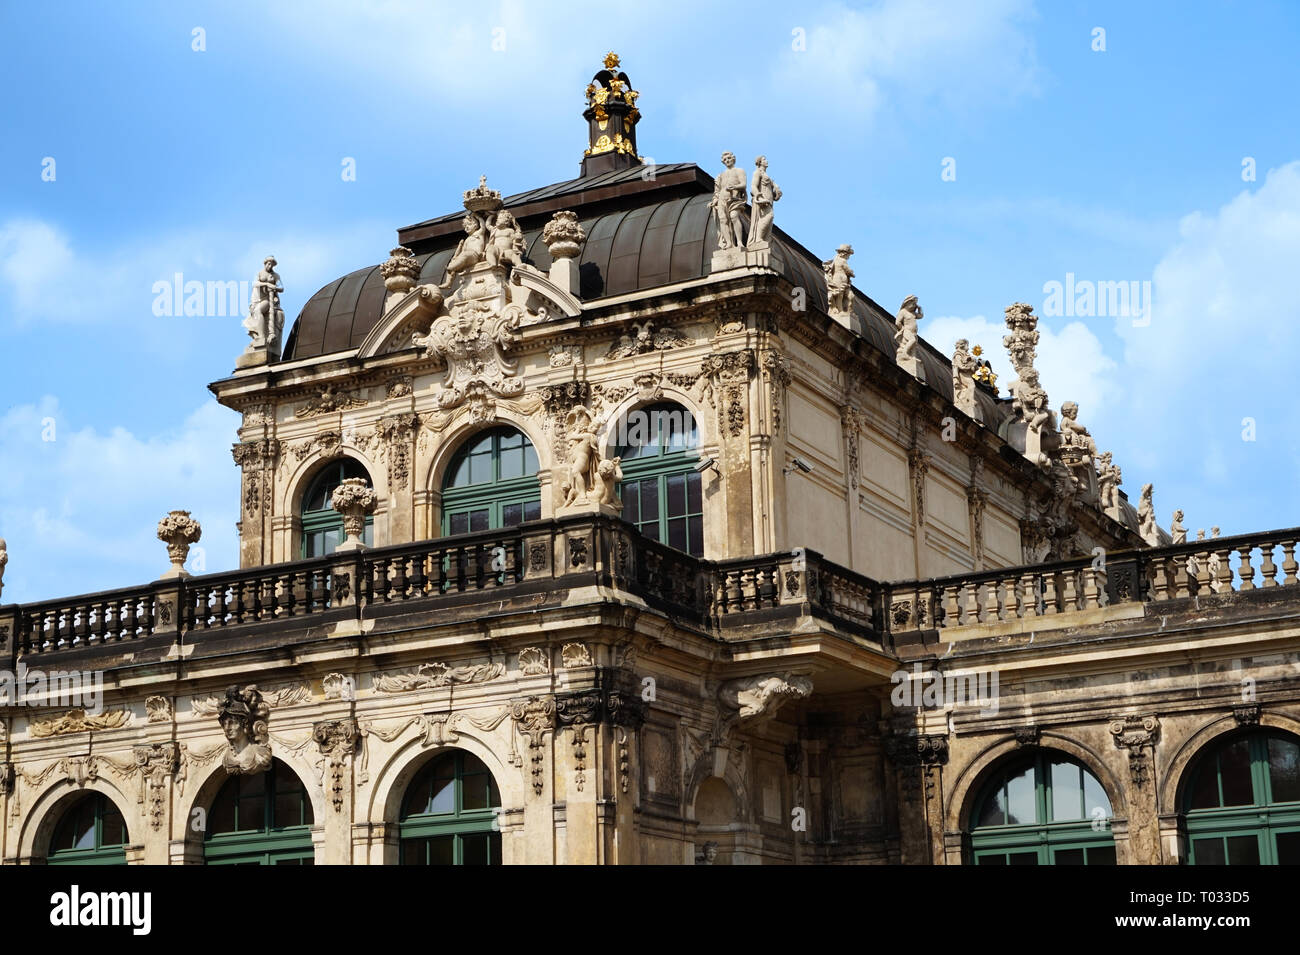 Zwinger Palace Rococo Style Sculptures Dresden Germany Stock Photo